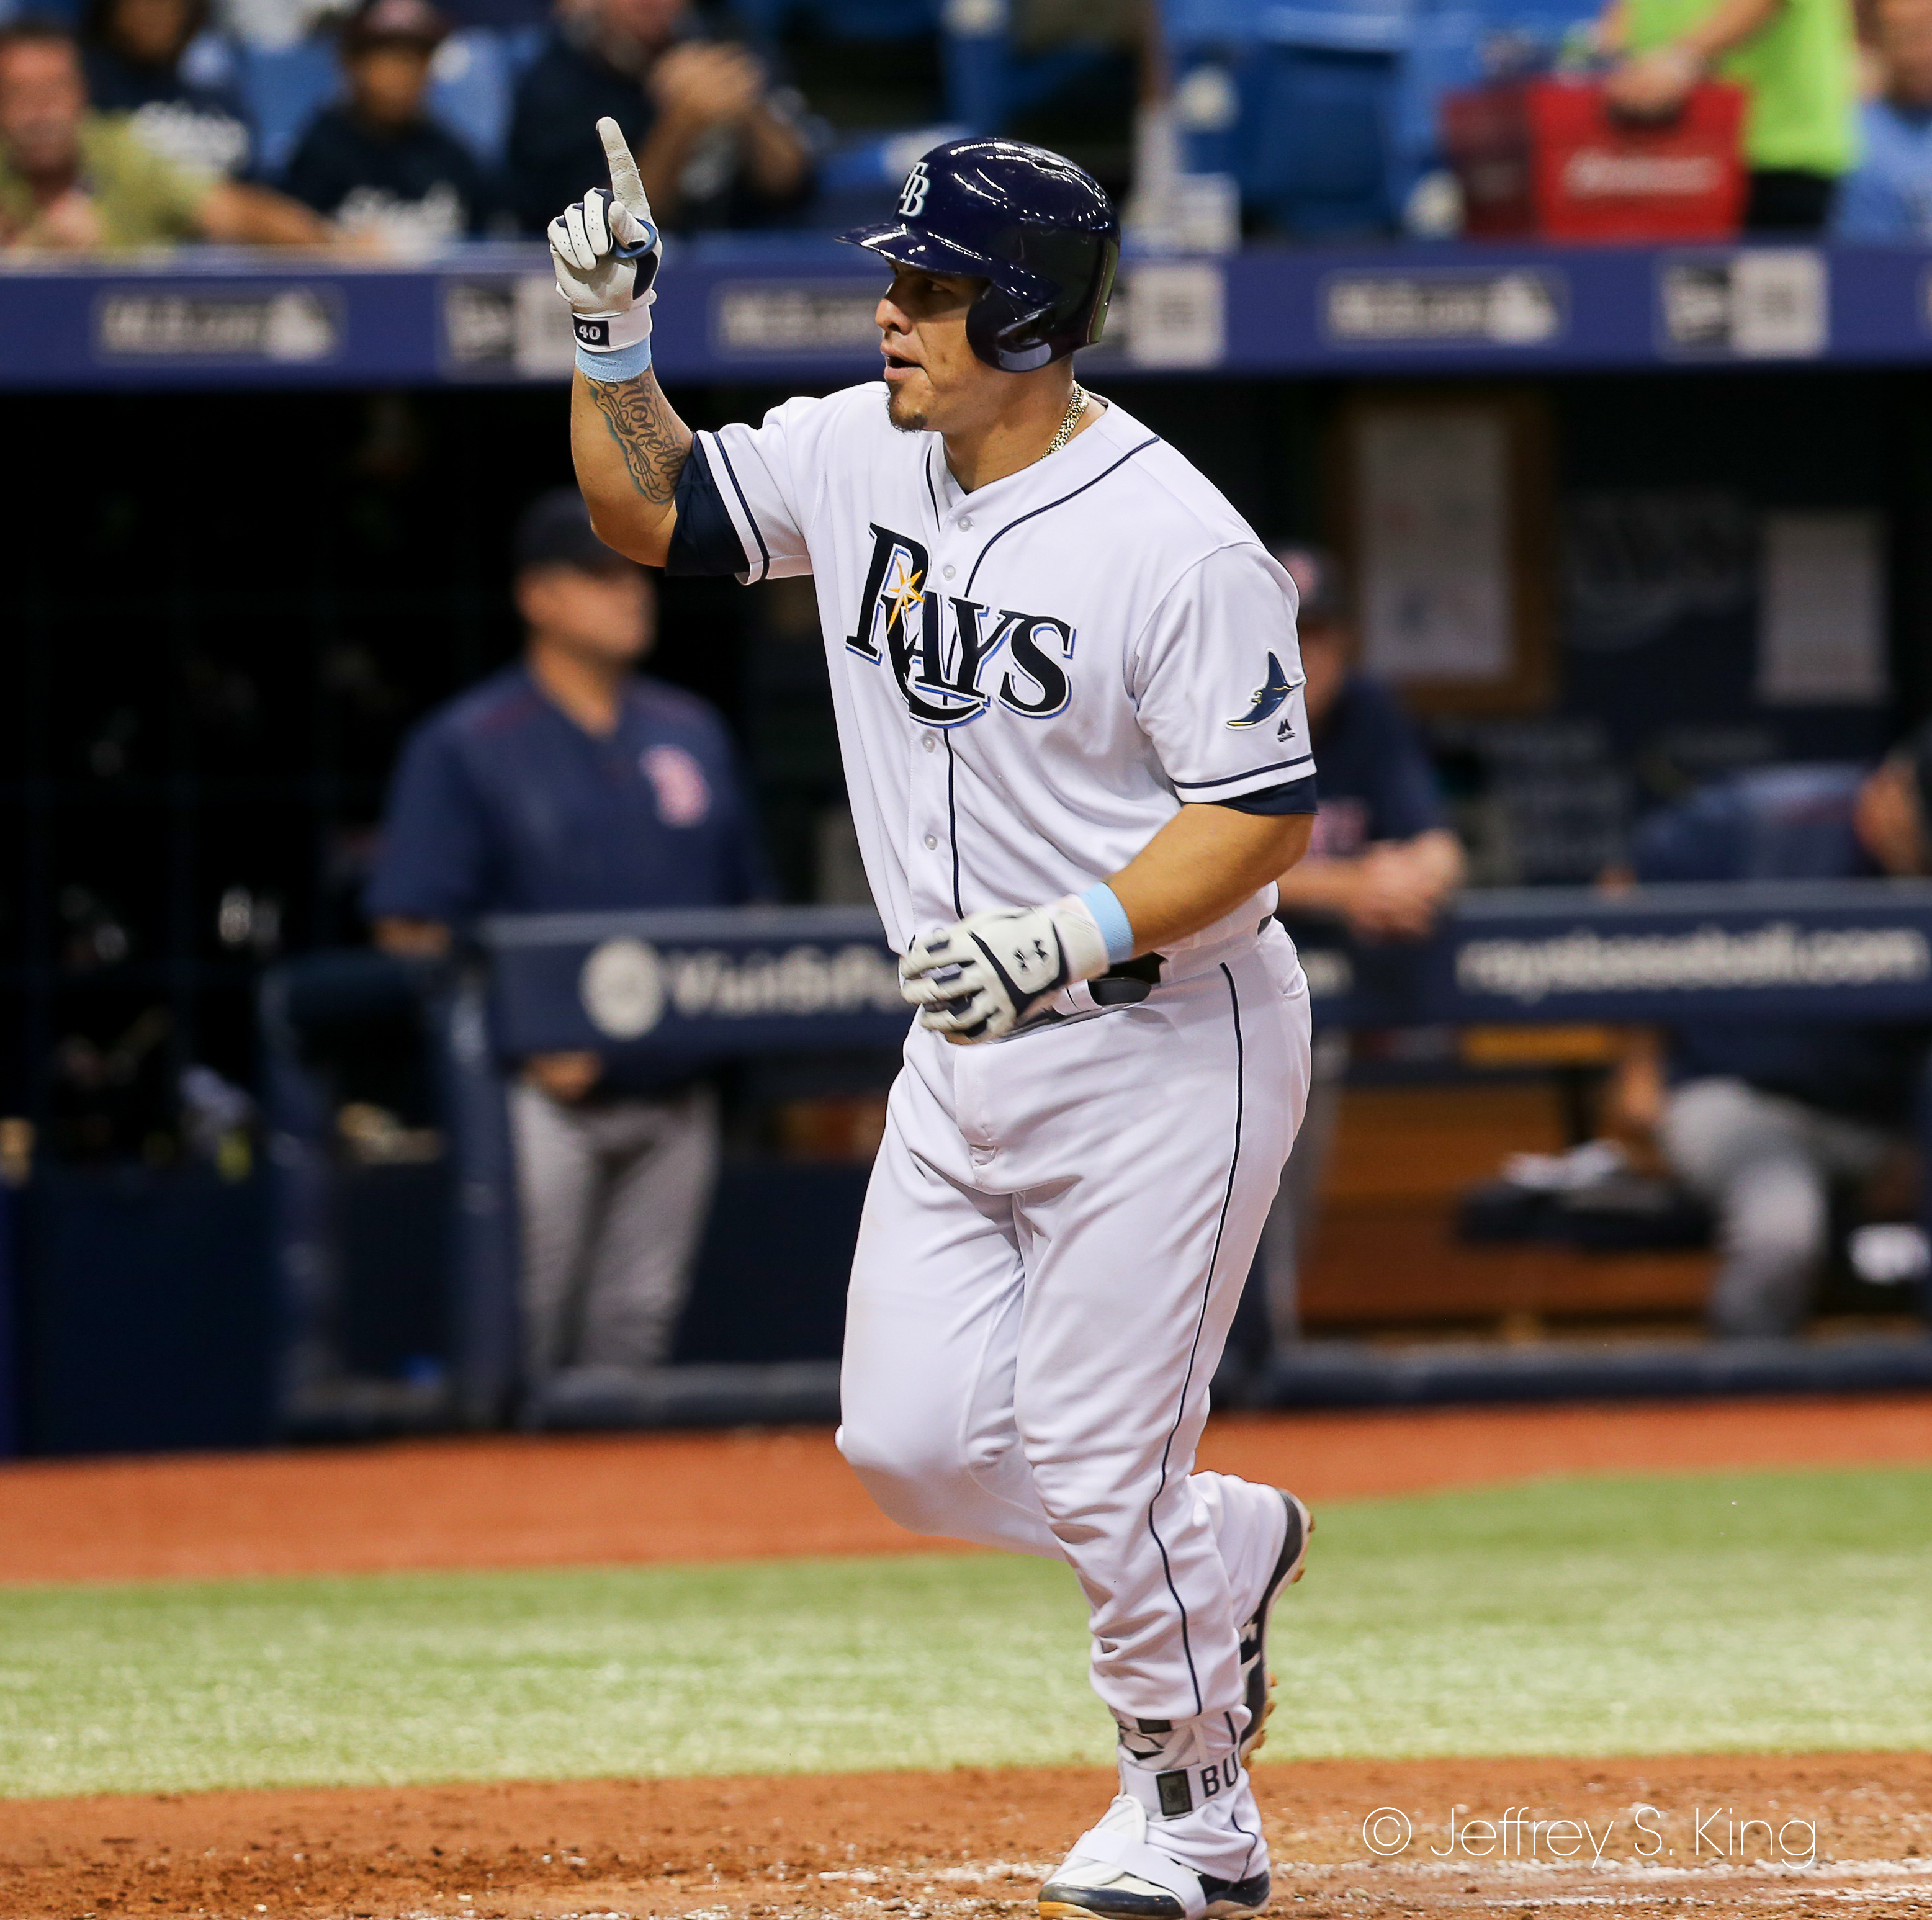 Ramos hit two home runs for the Rays./JEFFREY S. KING